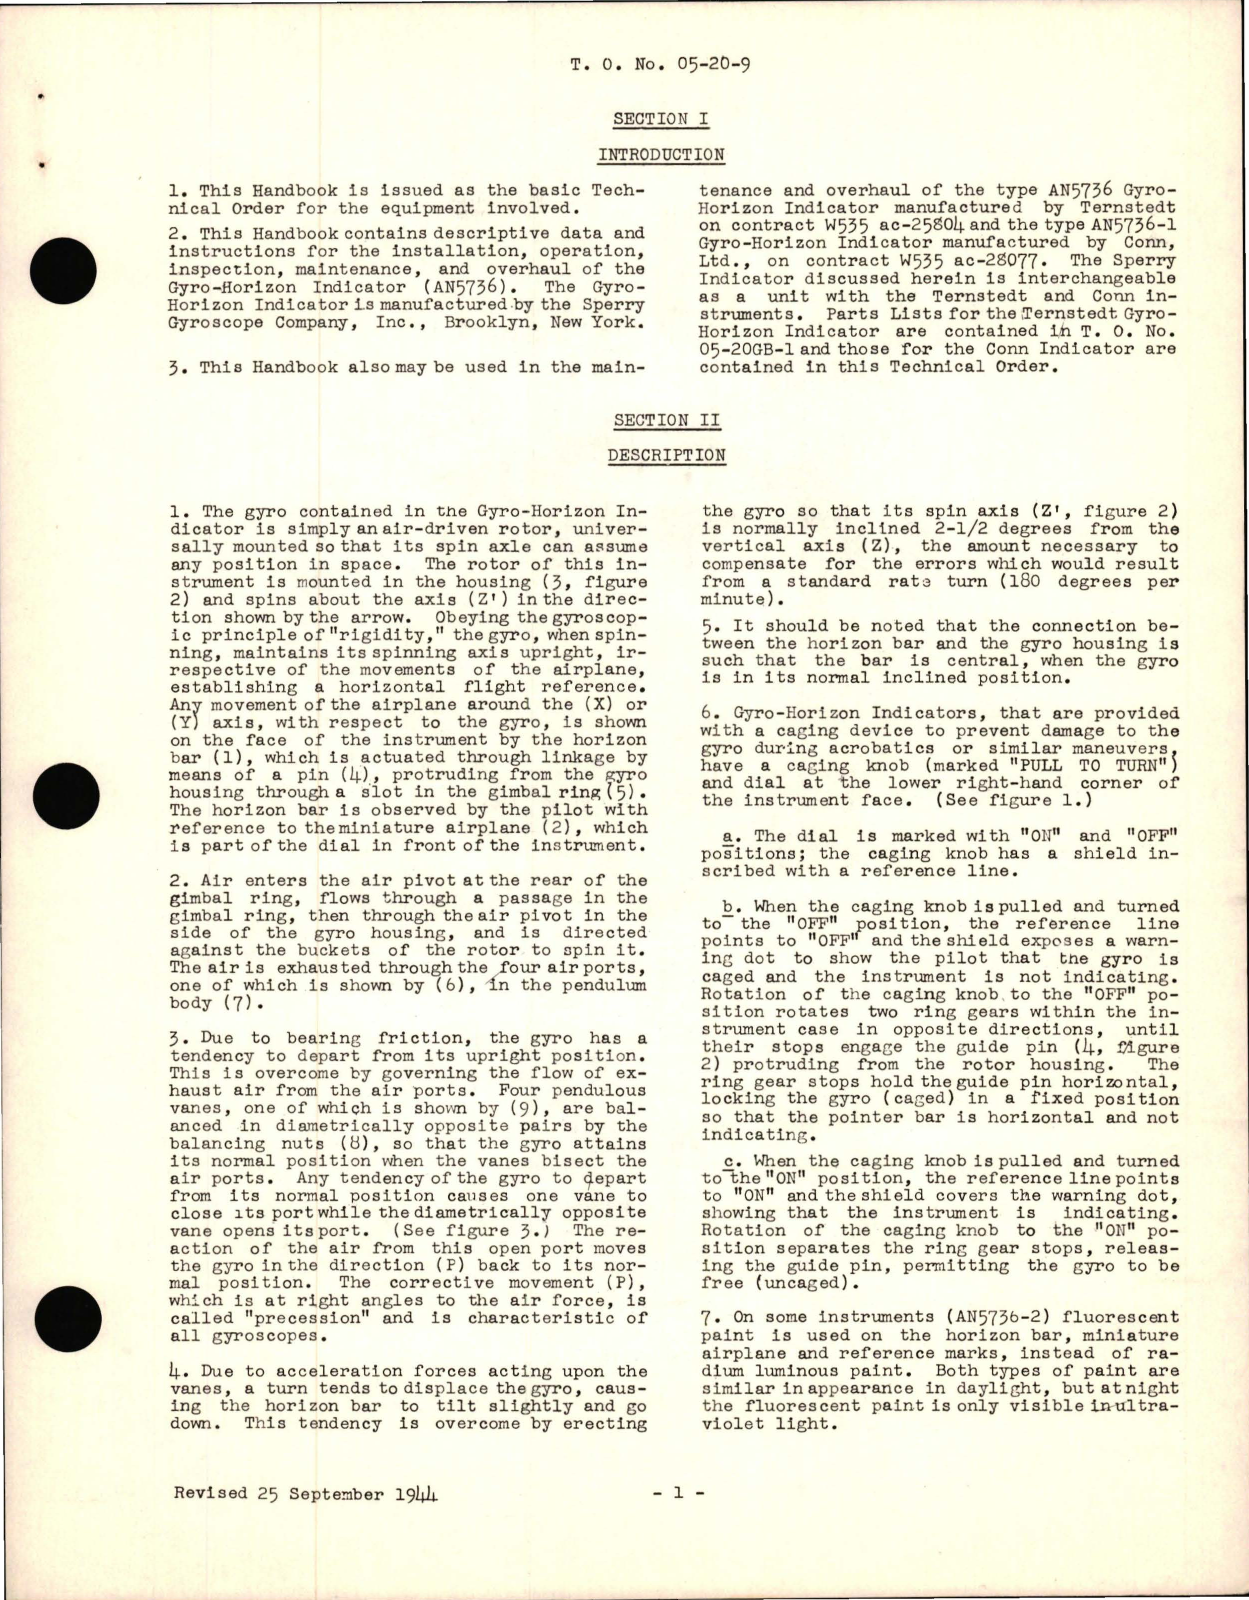 Sample page 5 from AirCorps Library document: Operation, Service and Overhaul Instructions with Parts for Gyro Horizon Indicator - Type AN5736